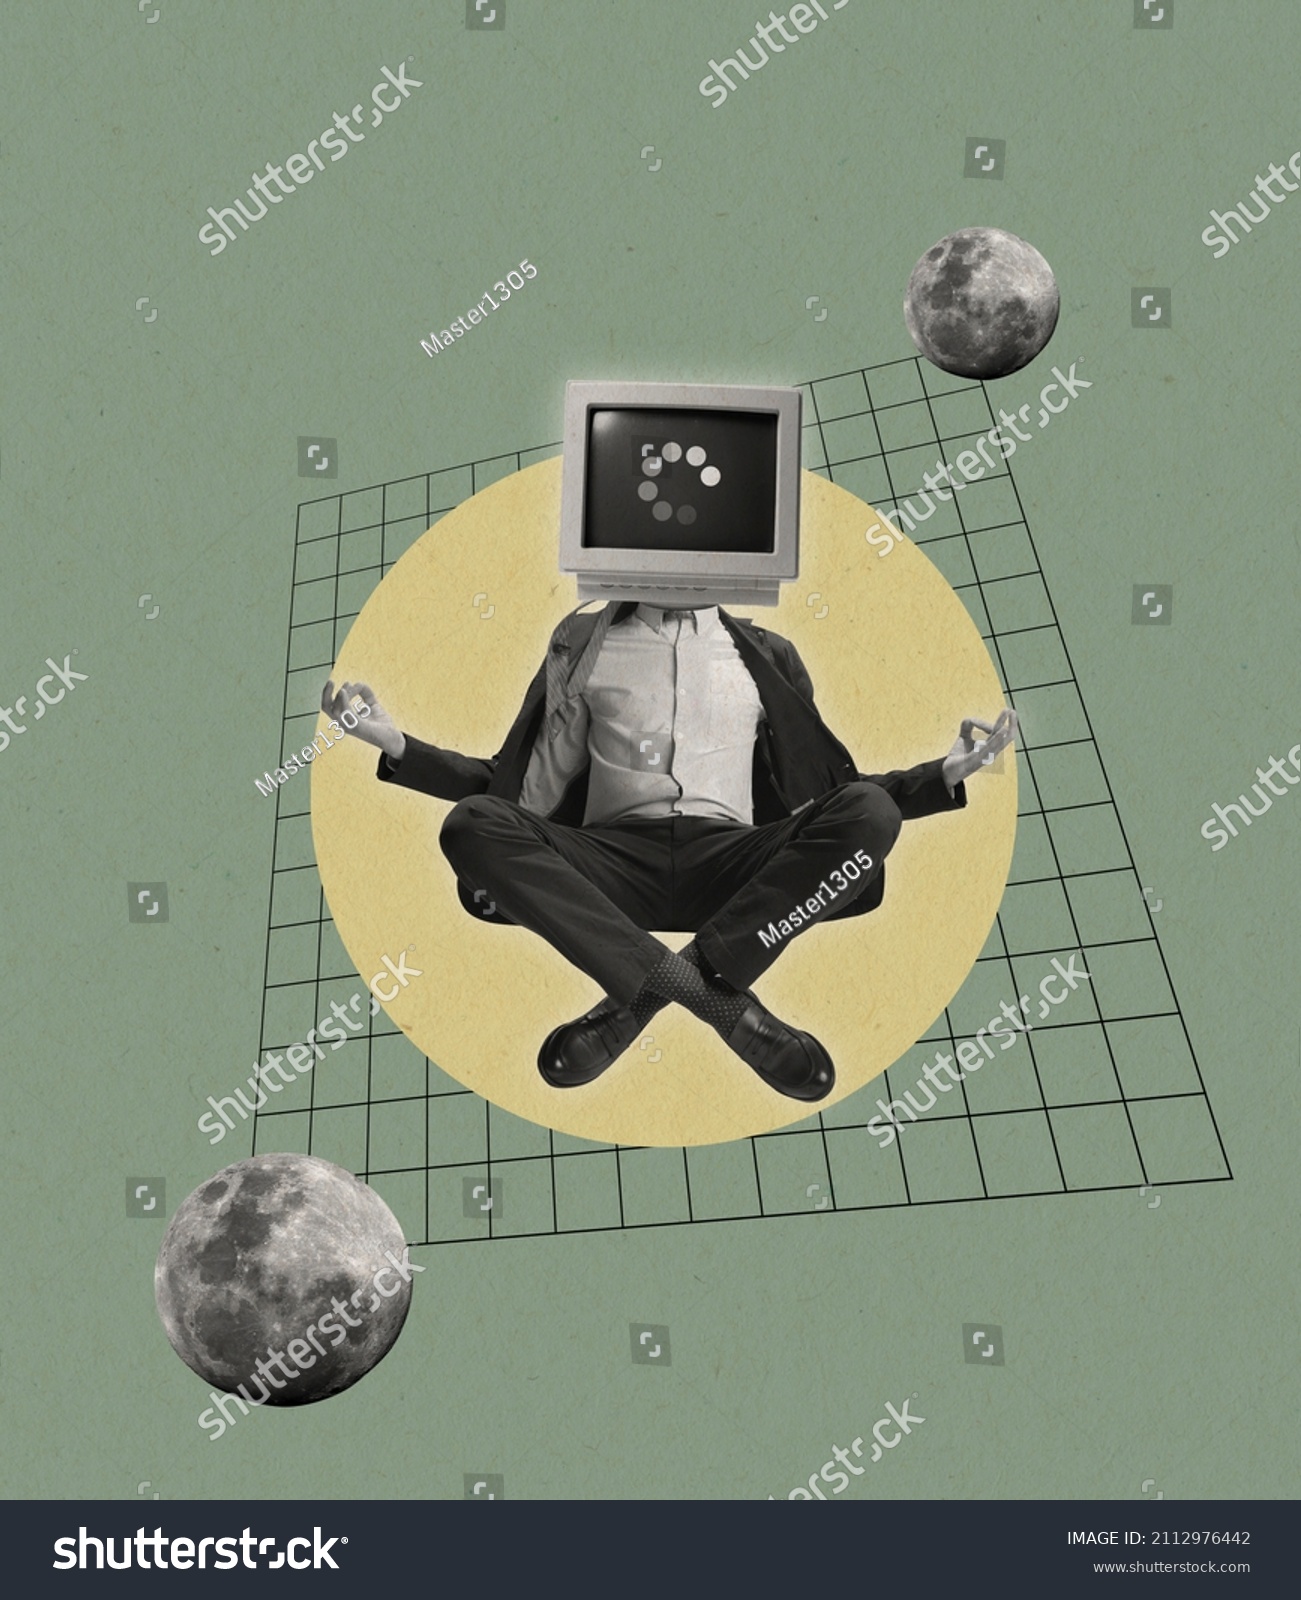 Contemporary art collage. Man, businessman in suit headed with retro computer sitting in yoga pose isolated over abstract background. Loading, generating new ideas. Concept of surrealism, retro style #2112976442